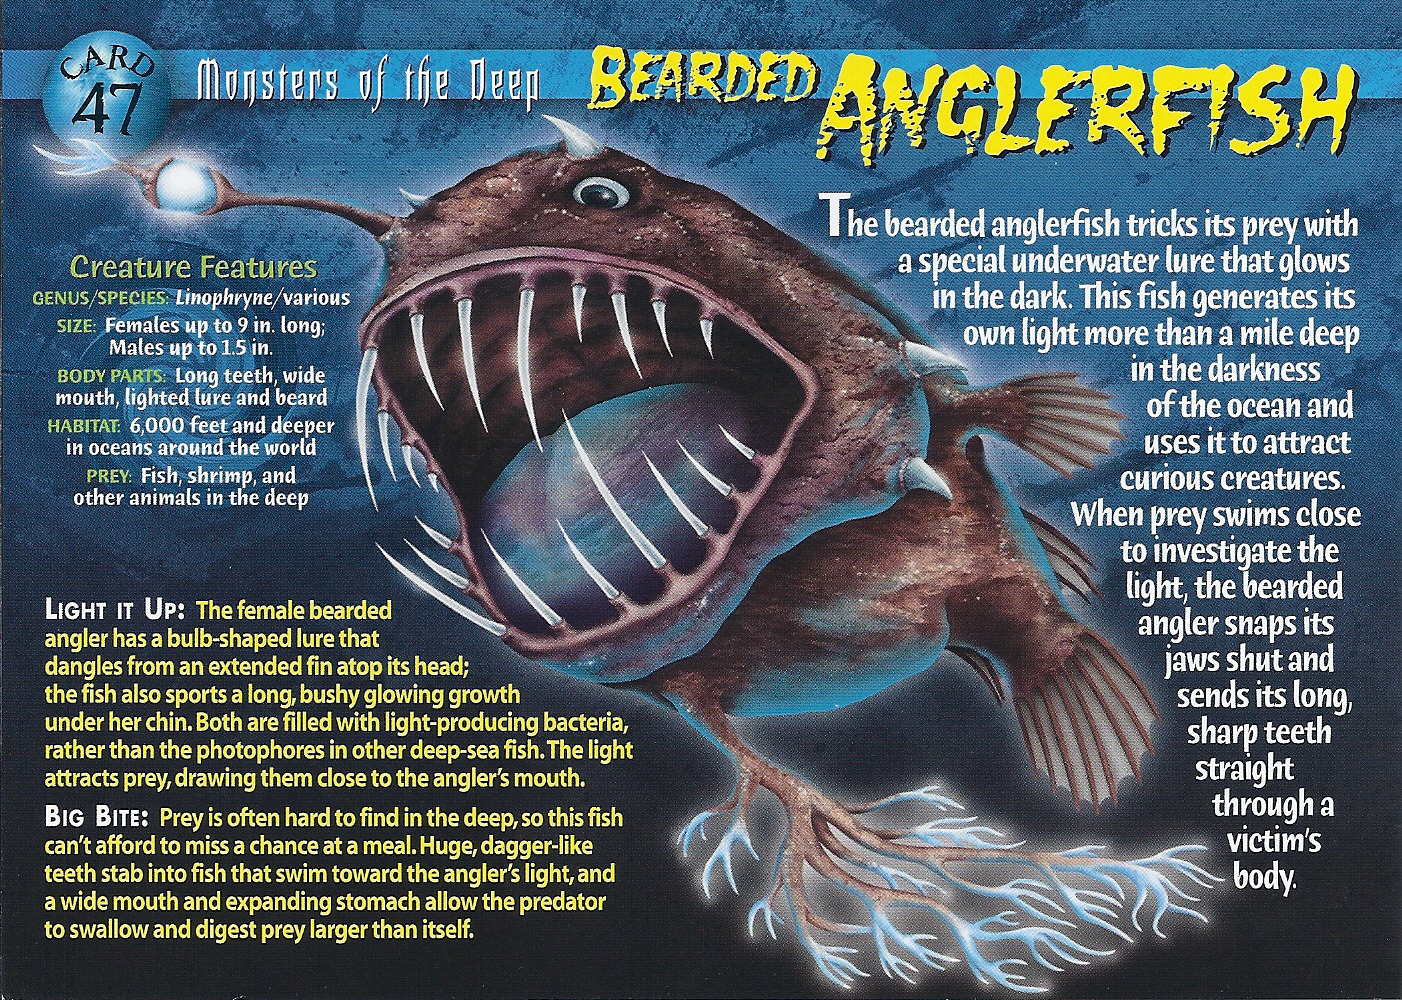 https://static.wikia.nocookie.net/wierdnwildcreatures/images/c/c1/Bearded_Anglerfish_front.jpg/revision/latest?cb=20130910033423